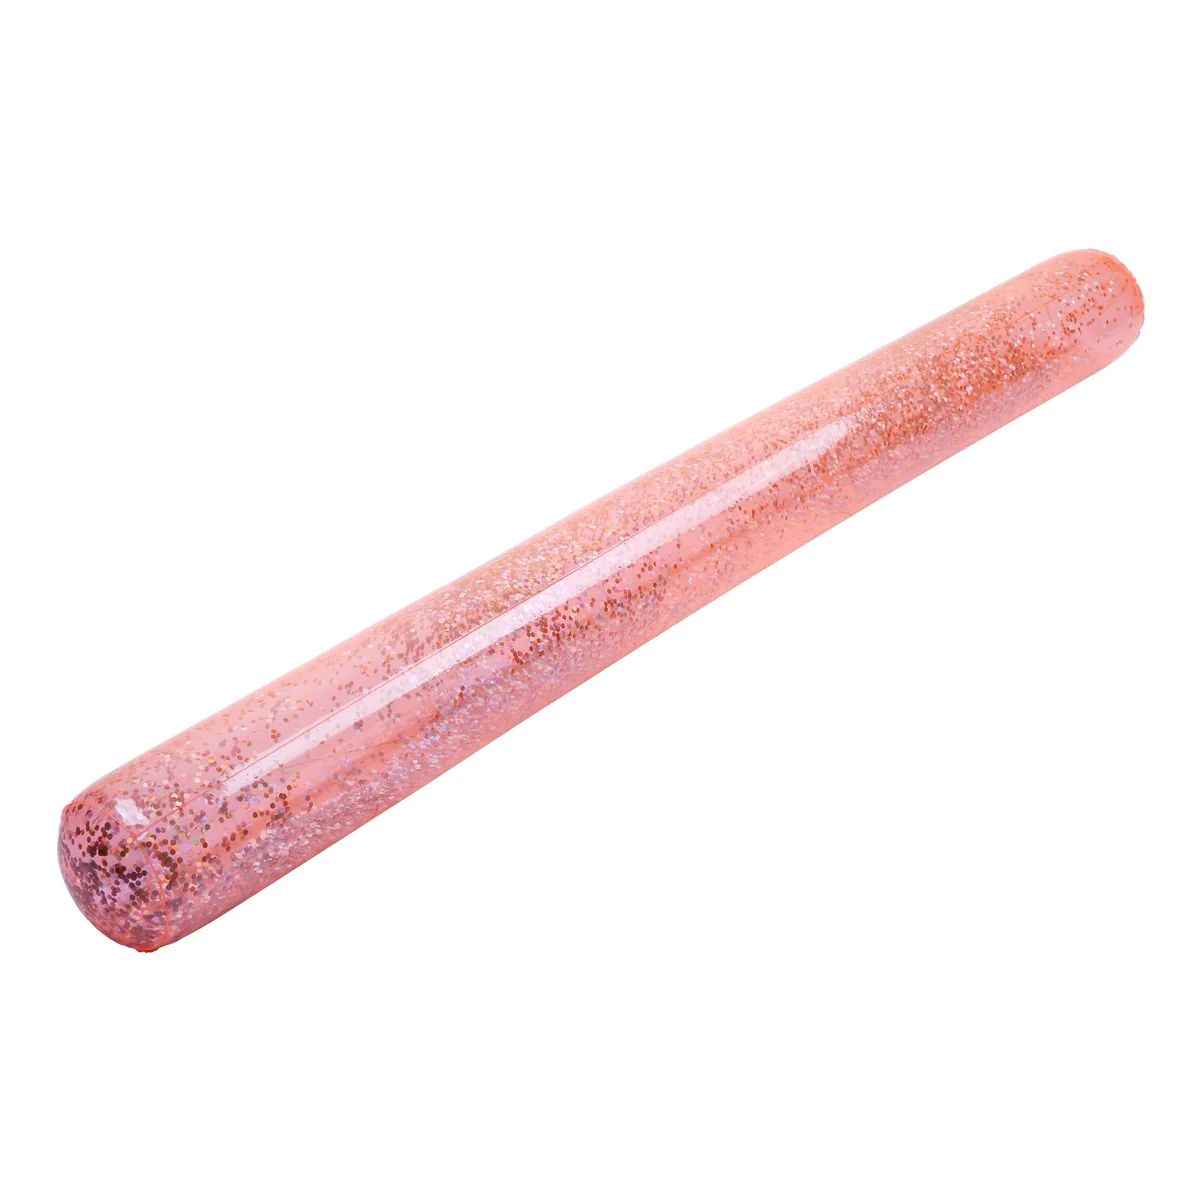 Neon Coral Glitter Pool Noodle | Ellie and Piper